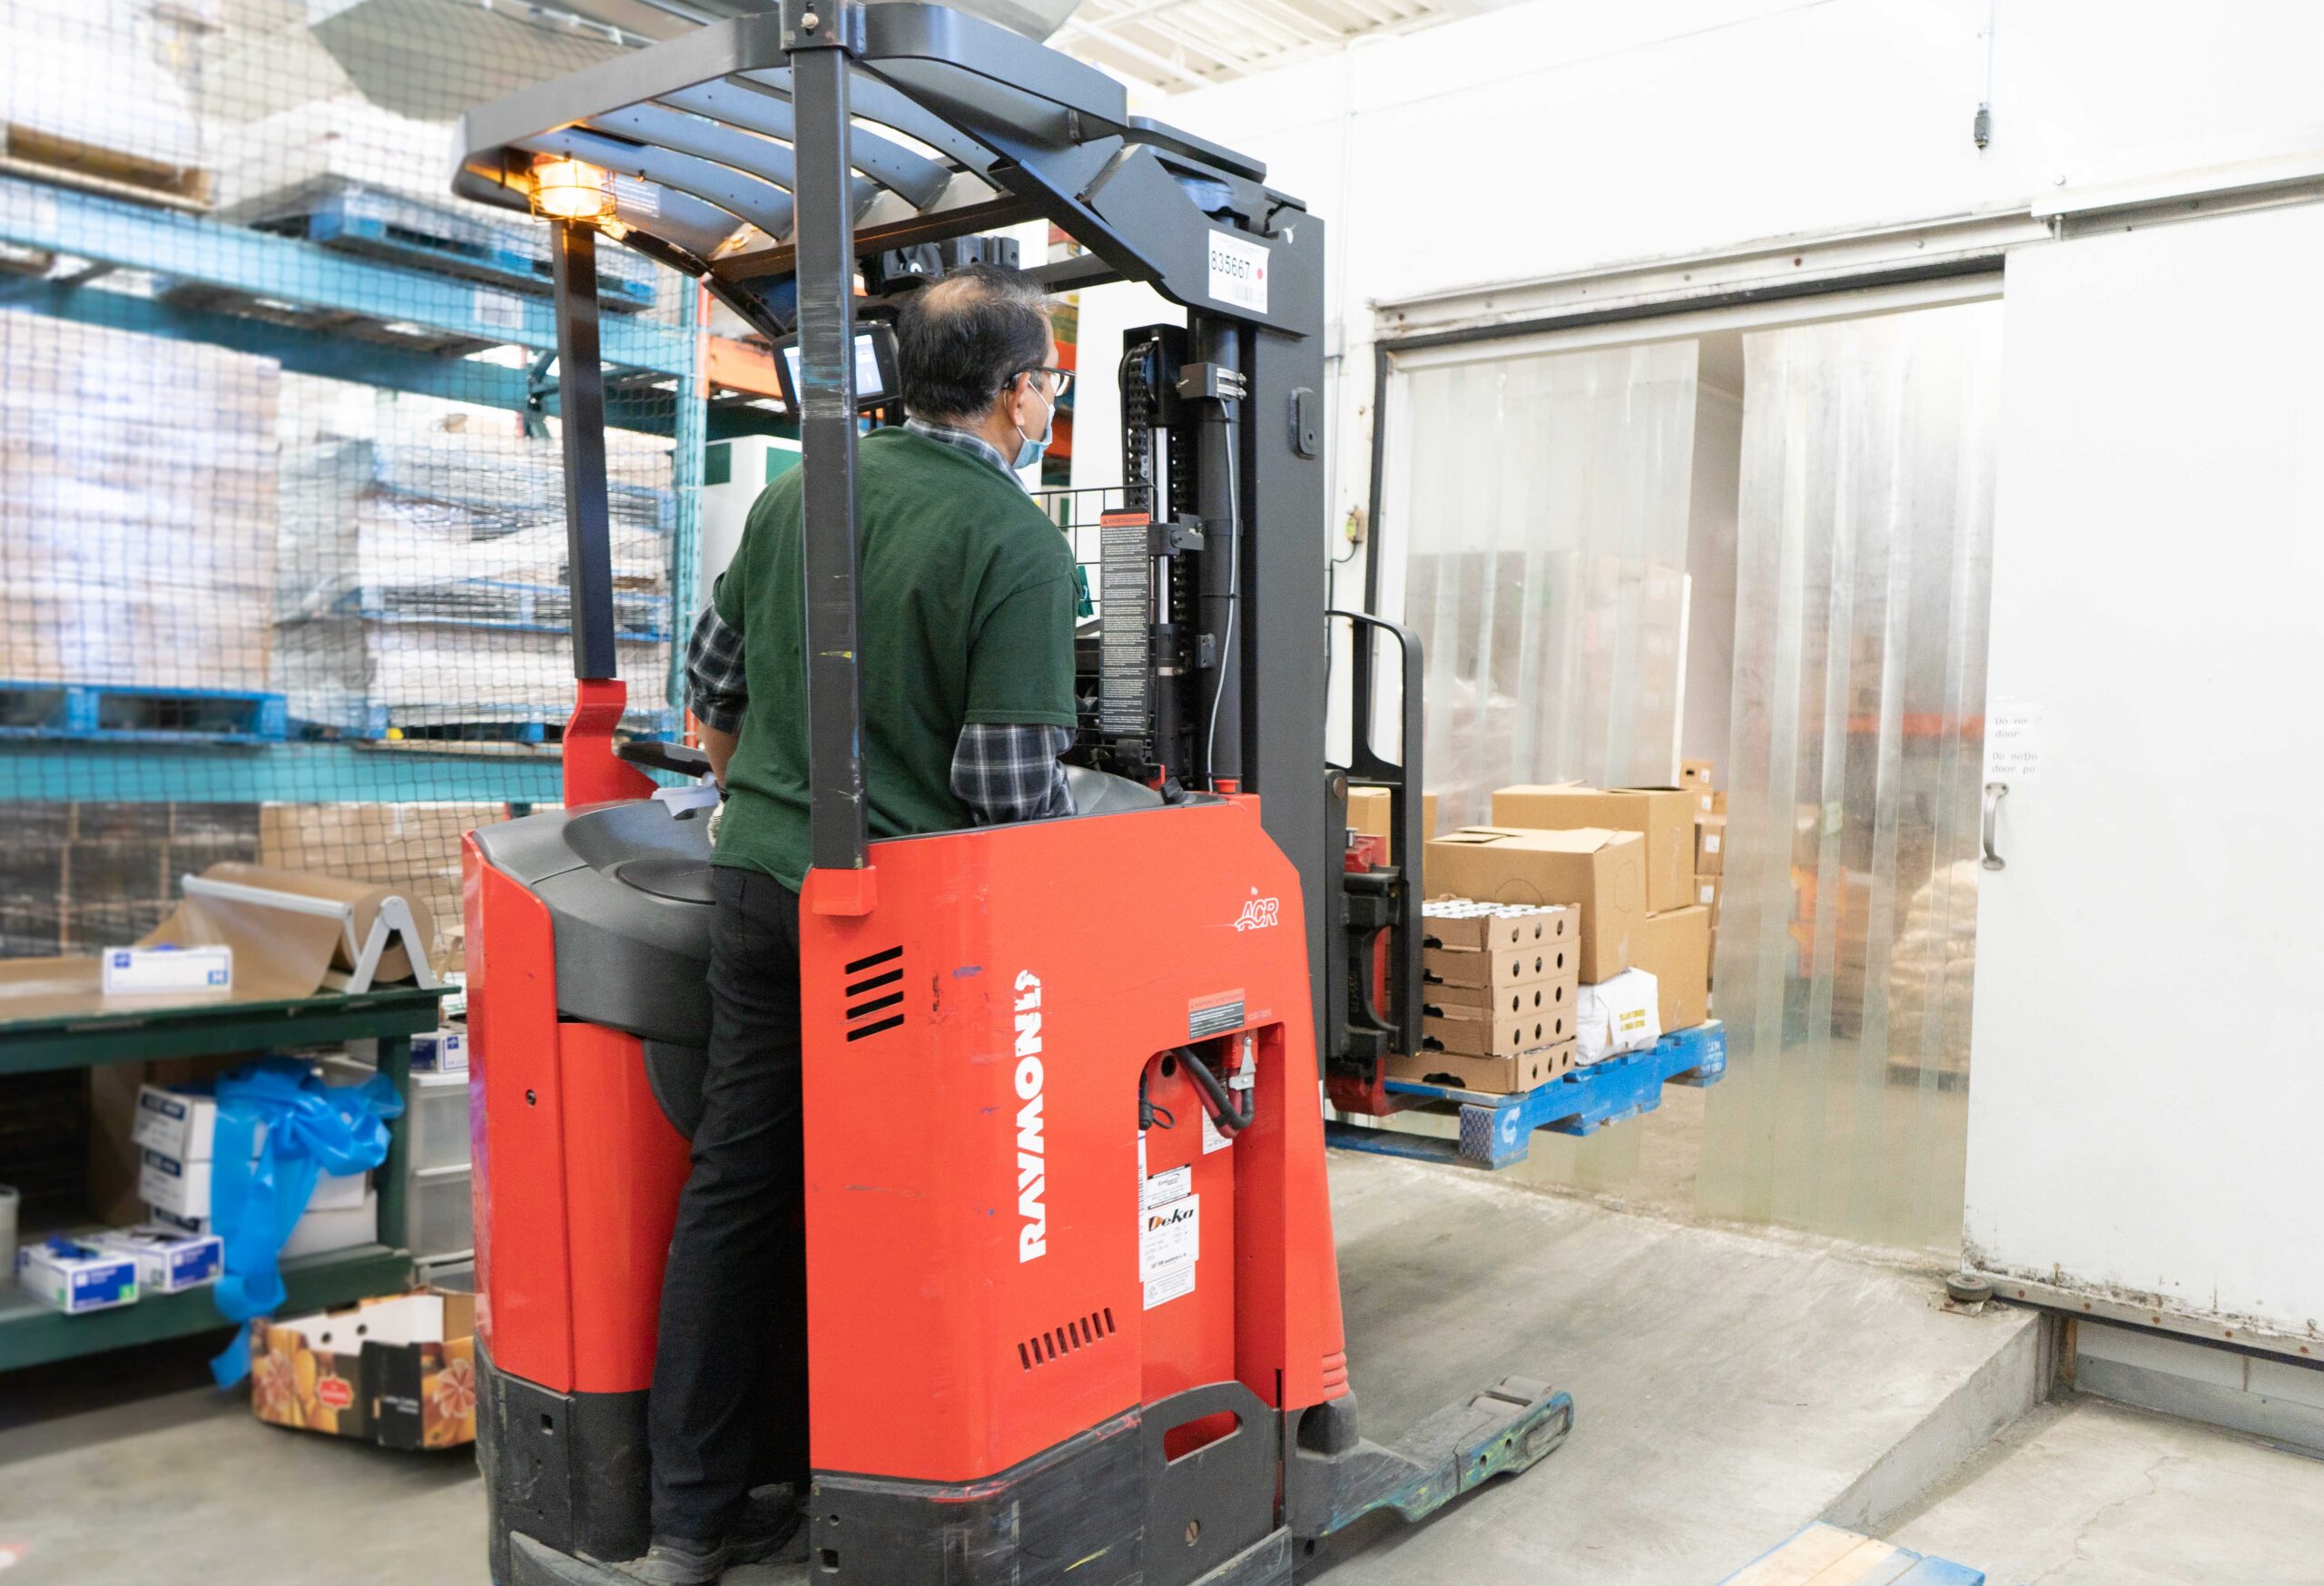 The Mississsauga Food Bank staff member operating a forklift in the warehouse to move a skid of food into the refridgerator.